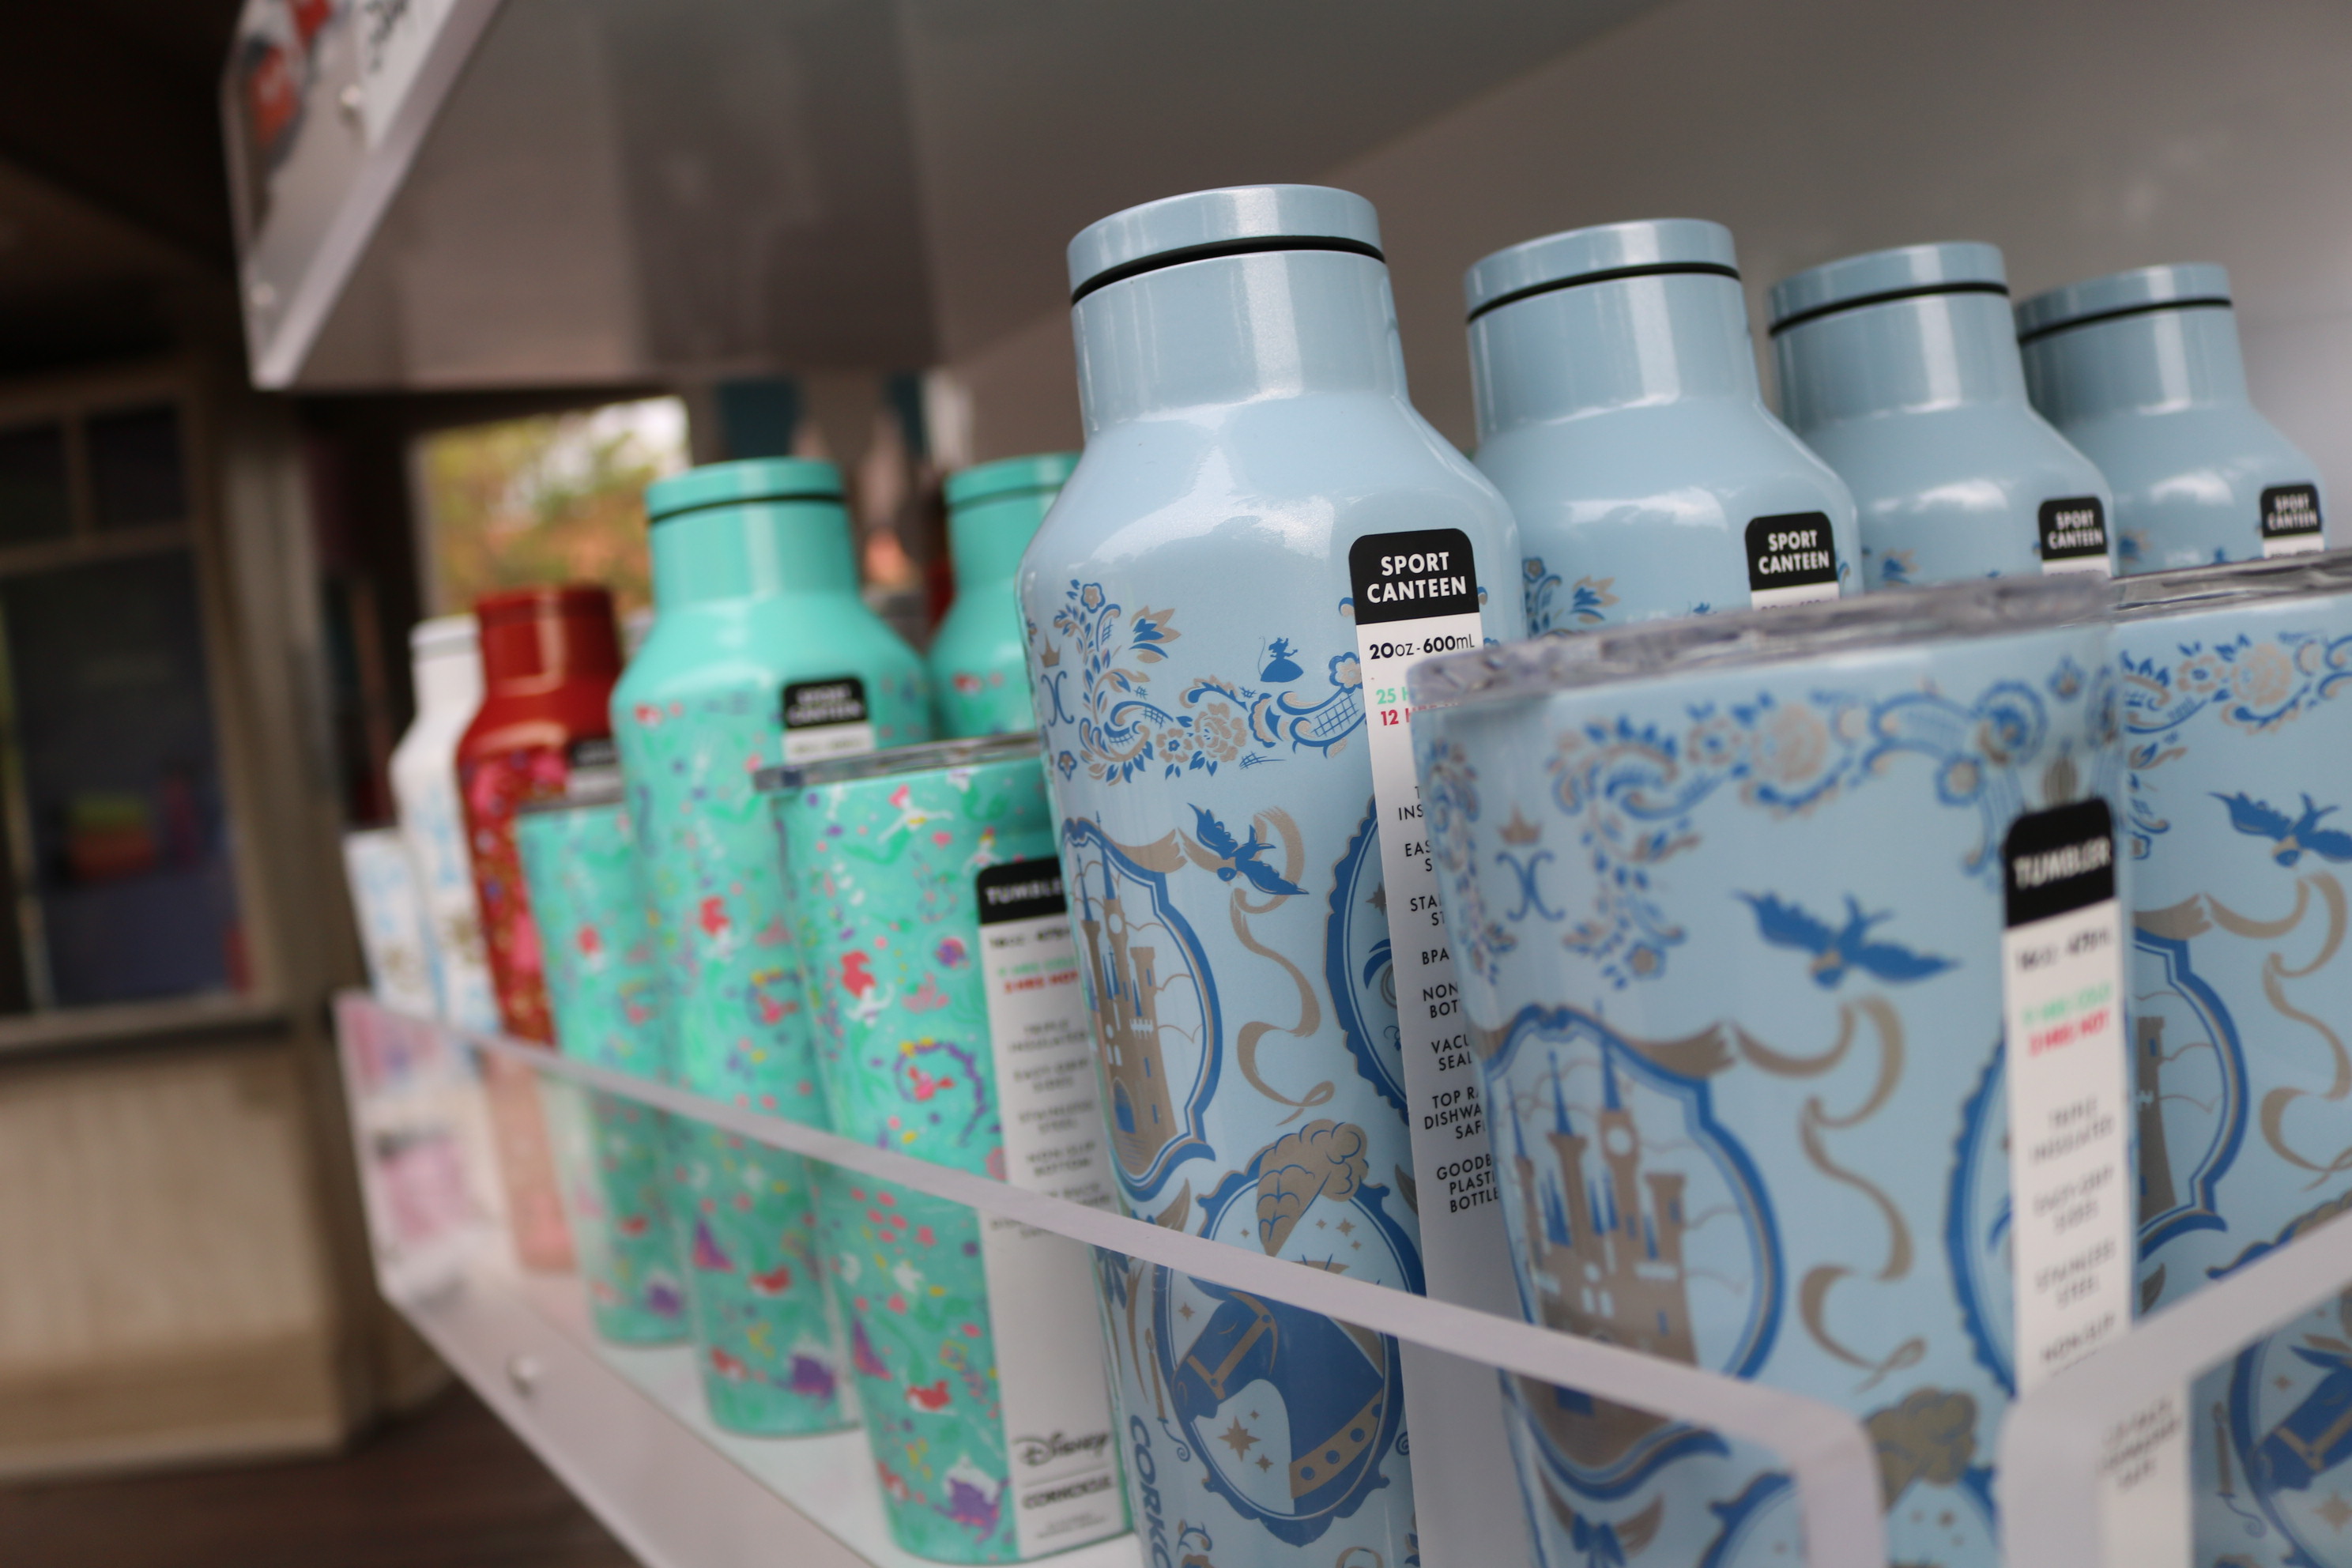 CORKCICLE becomes the Official Premium Drinkware of Walt Disney World Resort